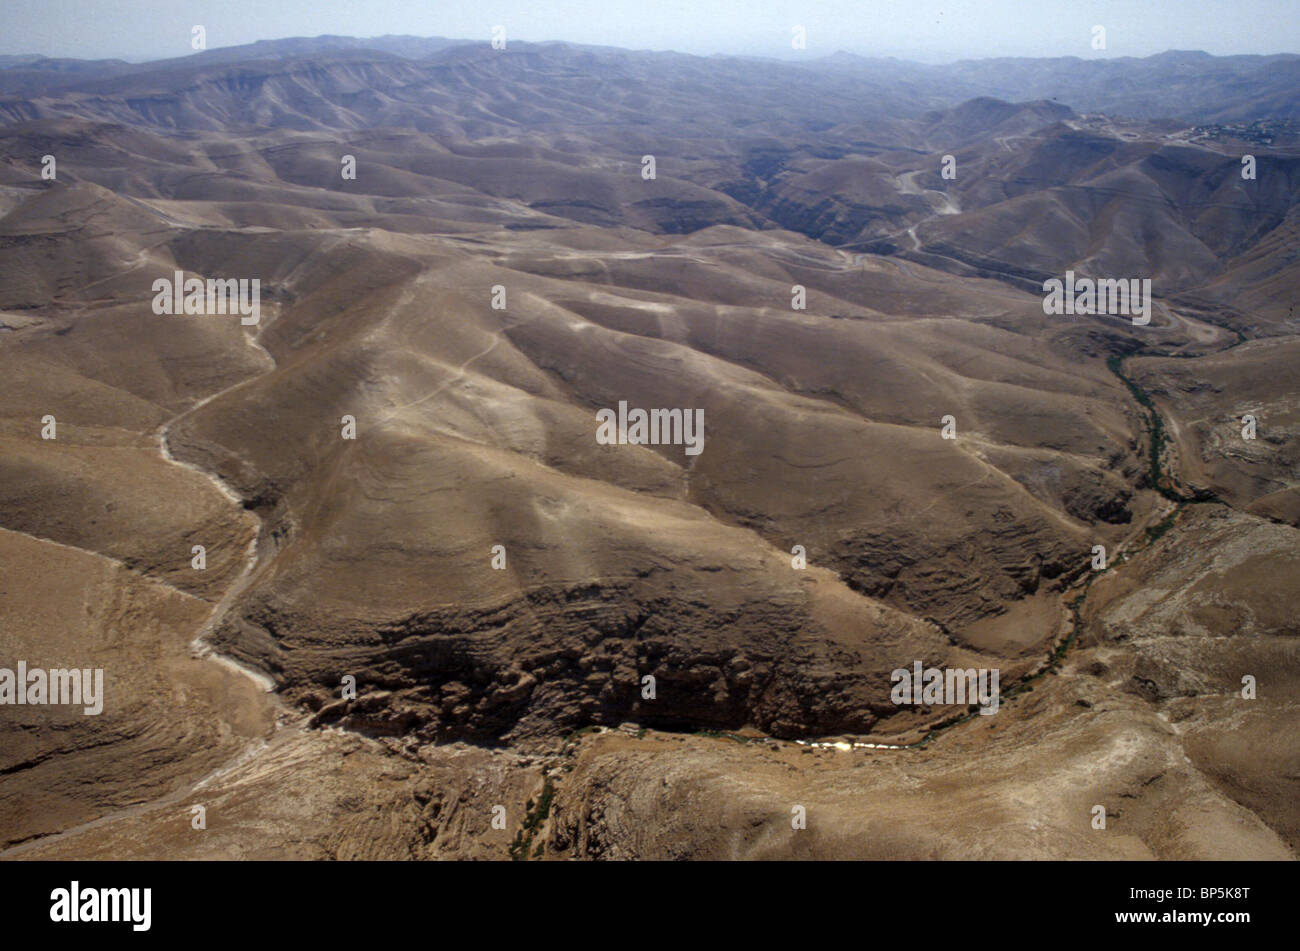 4910. JUDEA - THE WILDERNESS AND THE BARREN MOUNTAINS BETWEEN JERUSALEM AND JERICHO Stock Photo